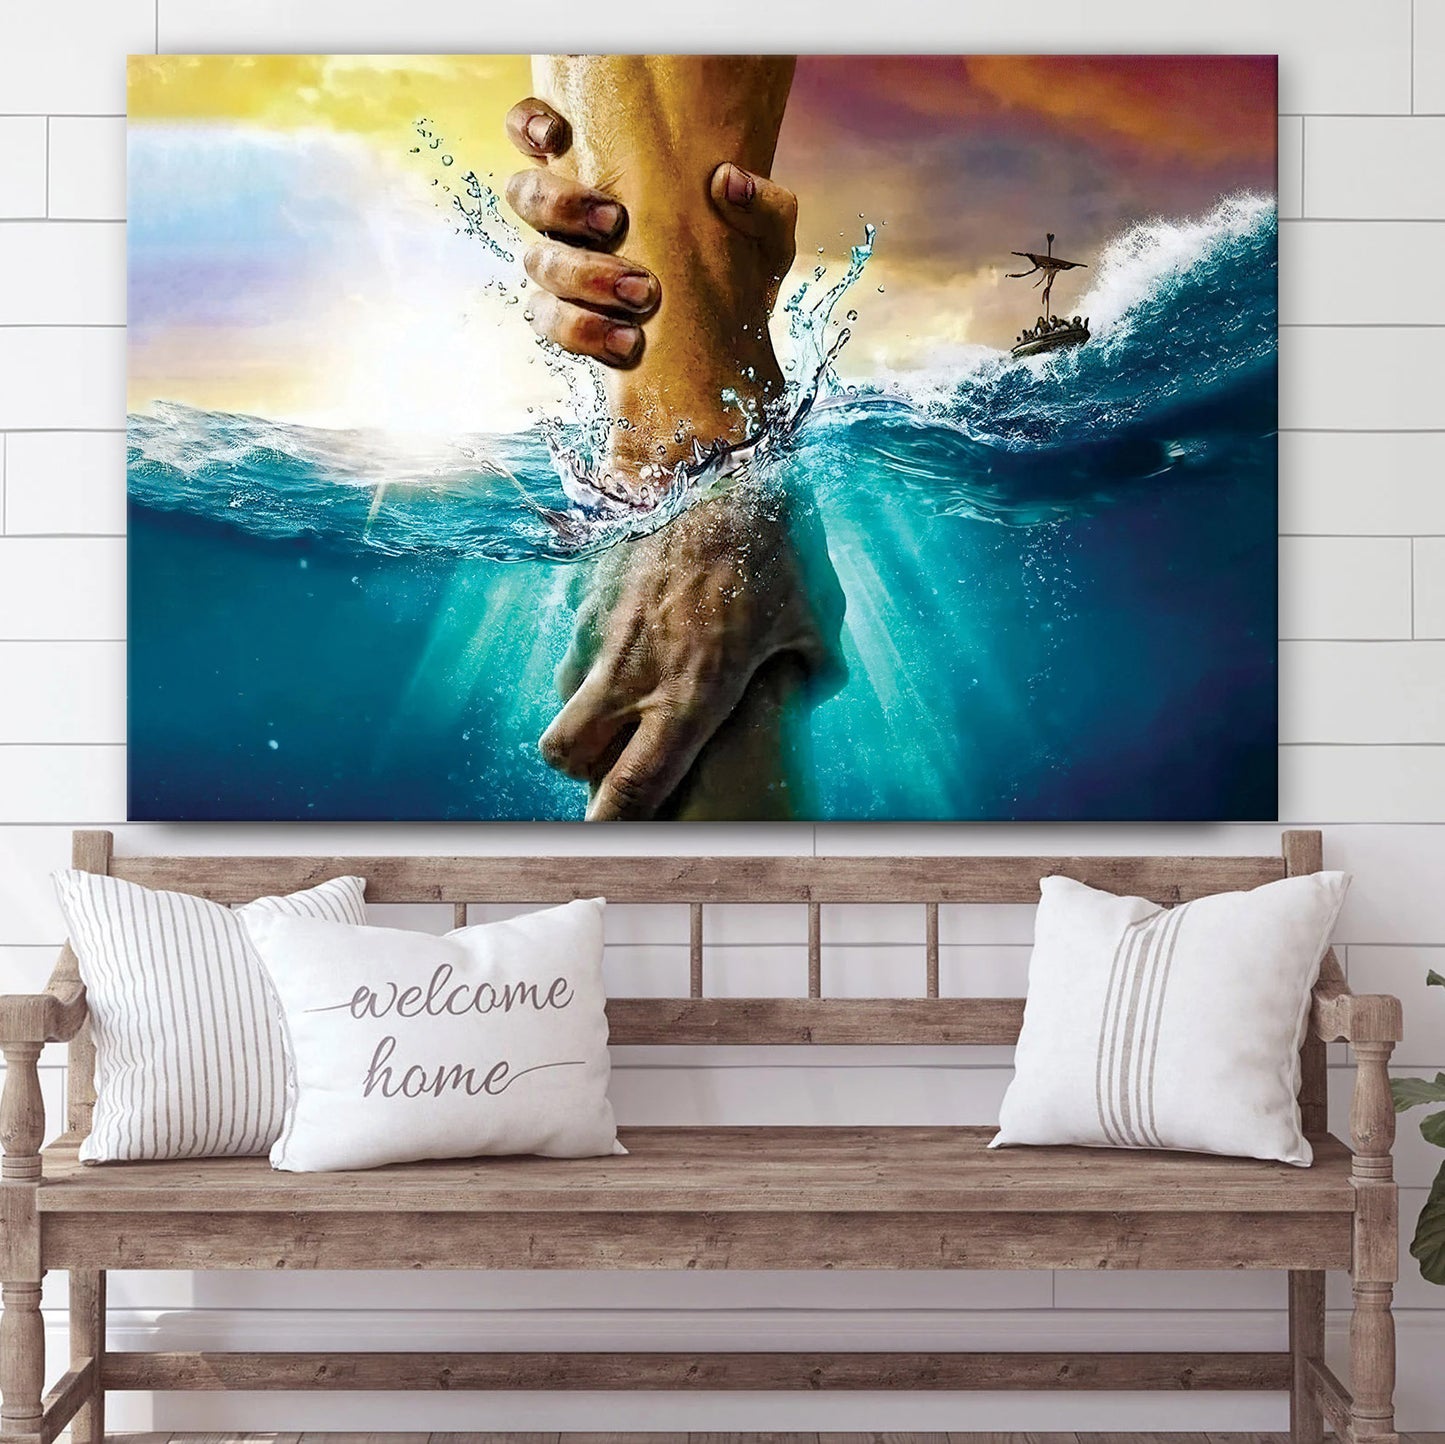 The Saving Hand Of Jesus - Canvas Pictures - Jesus Canvas Art - Christian Wall Art